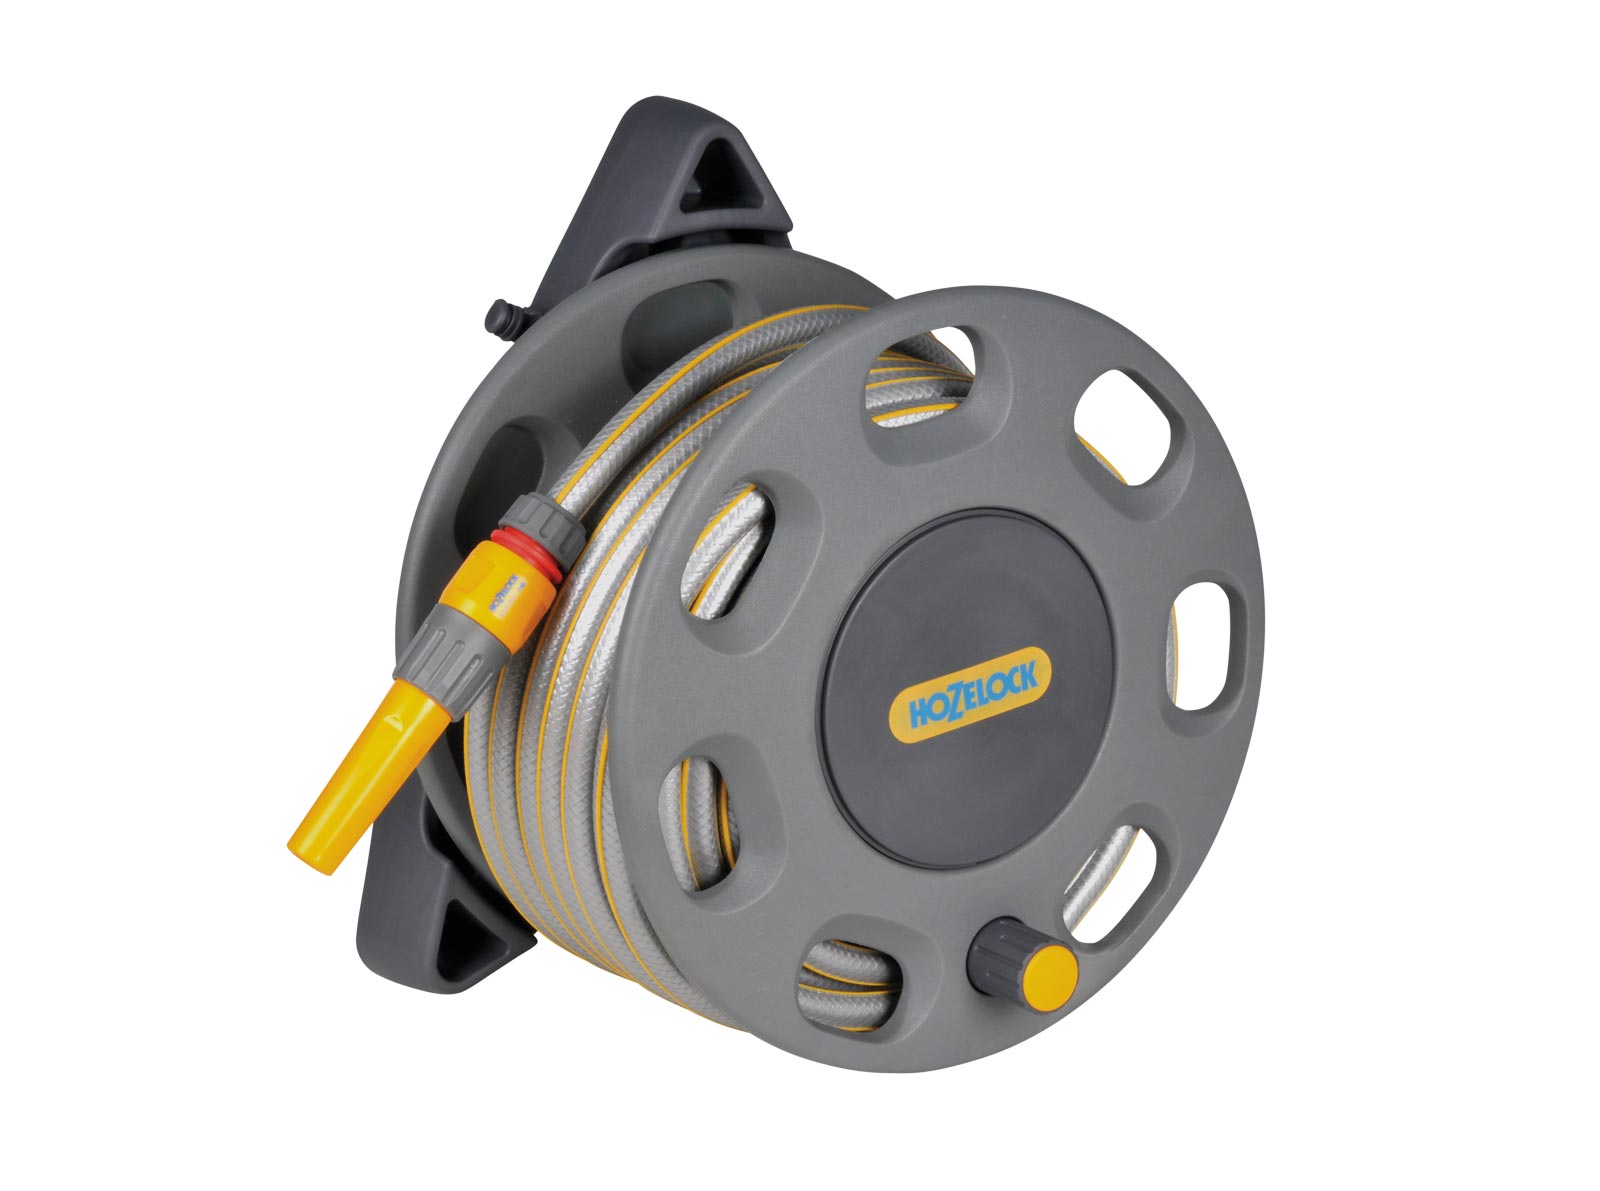 HOZELOCK - Wall-Mounted 30m Hose Reel with 15m Hose : Easy-to